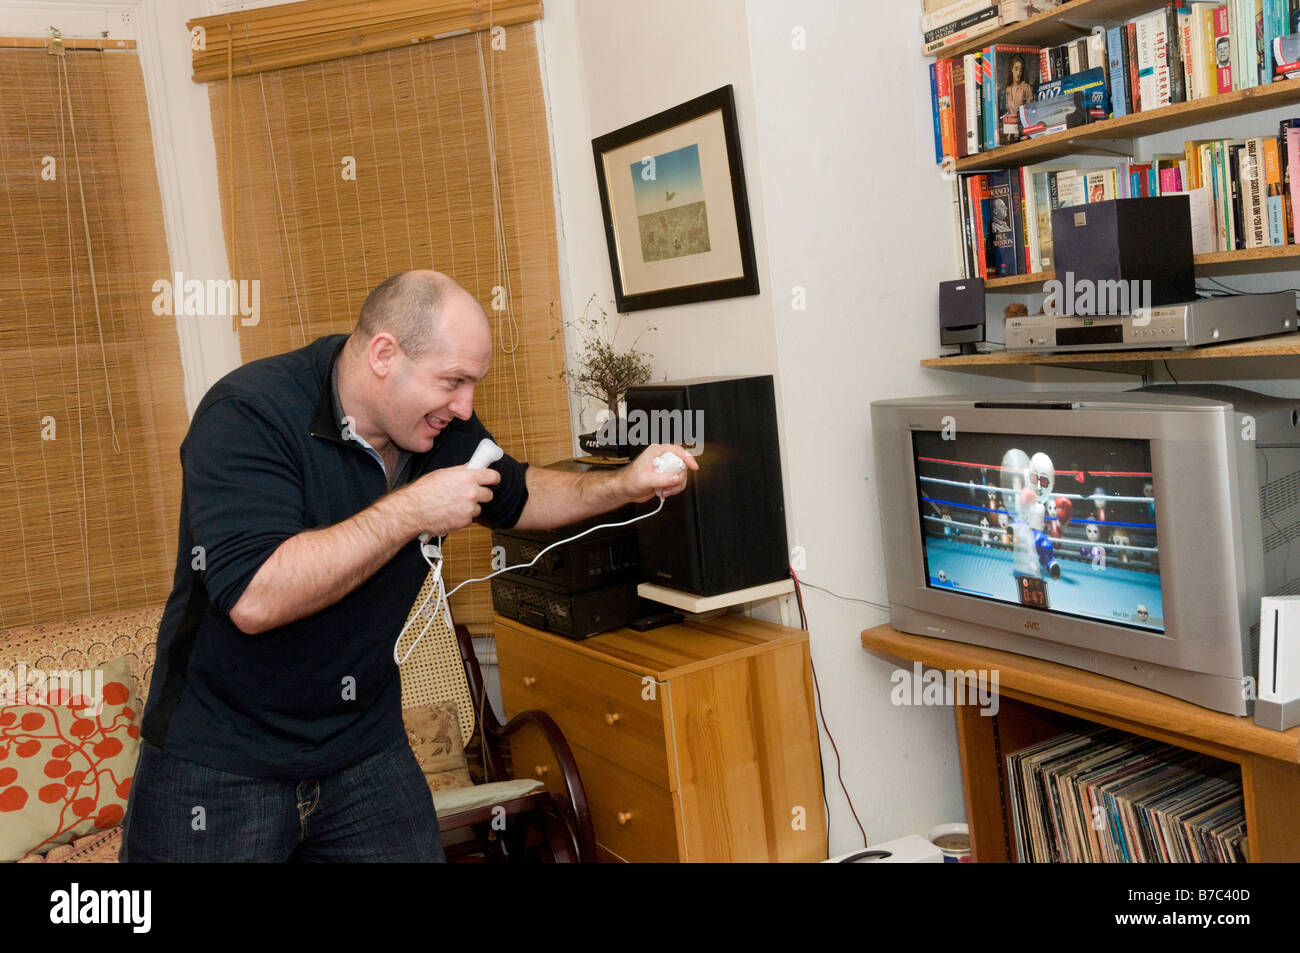 Man playing on a Nintendo Wii games console, England UK Stock Photo